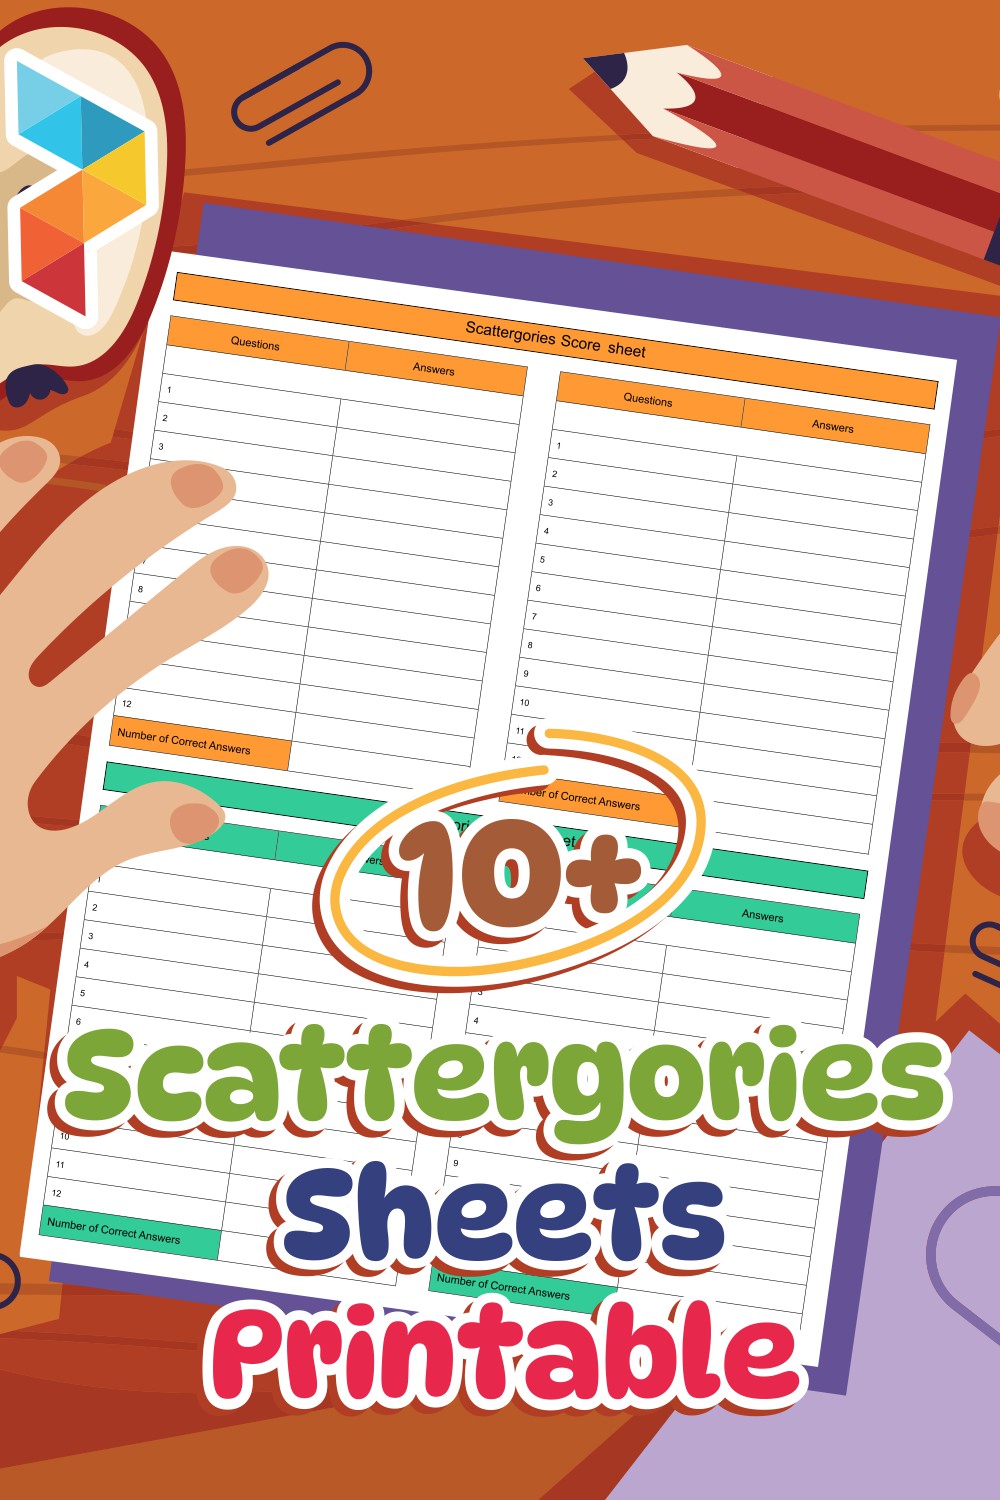 Scattergories Sheets Printable